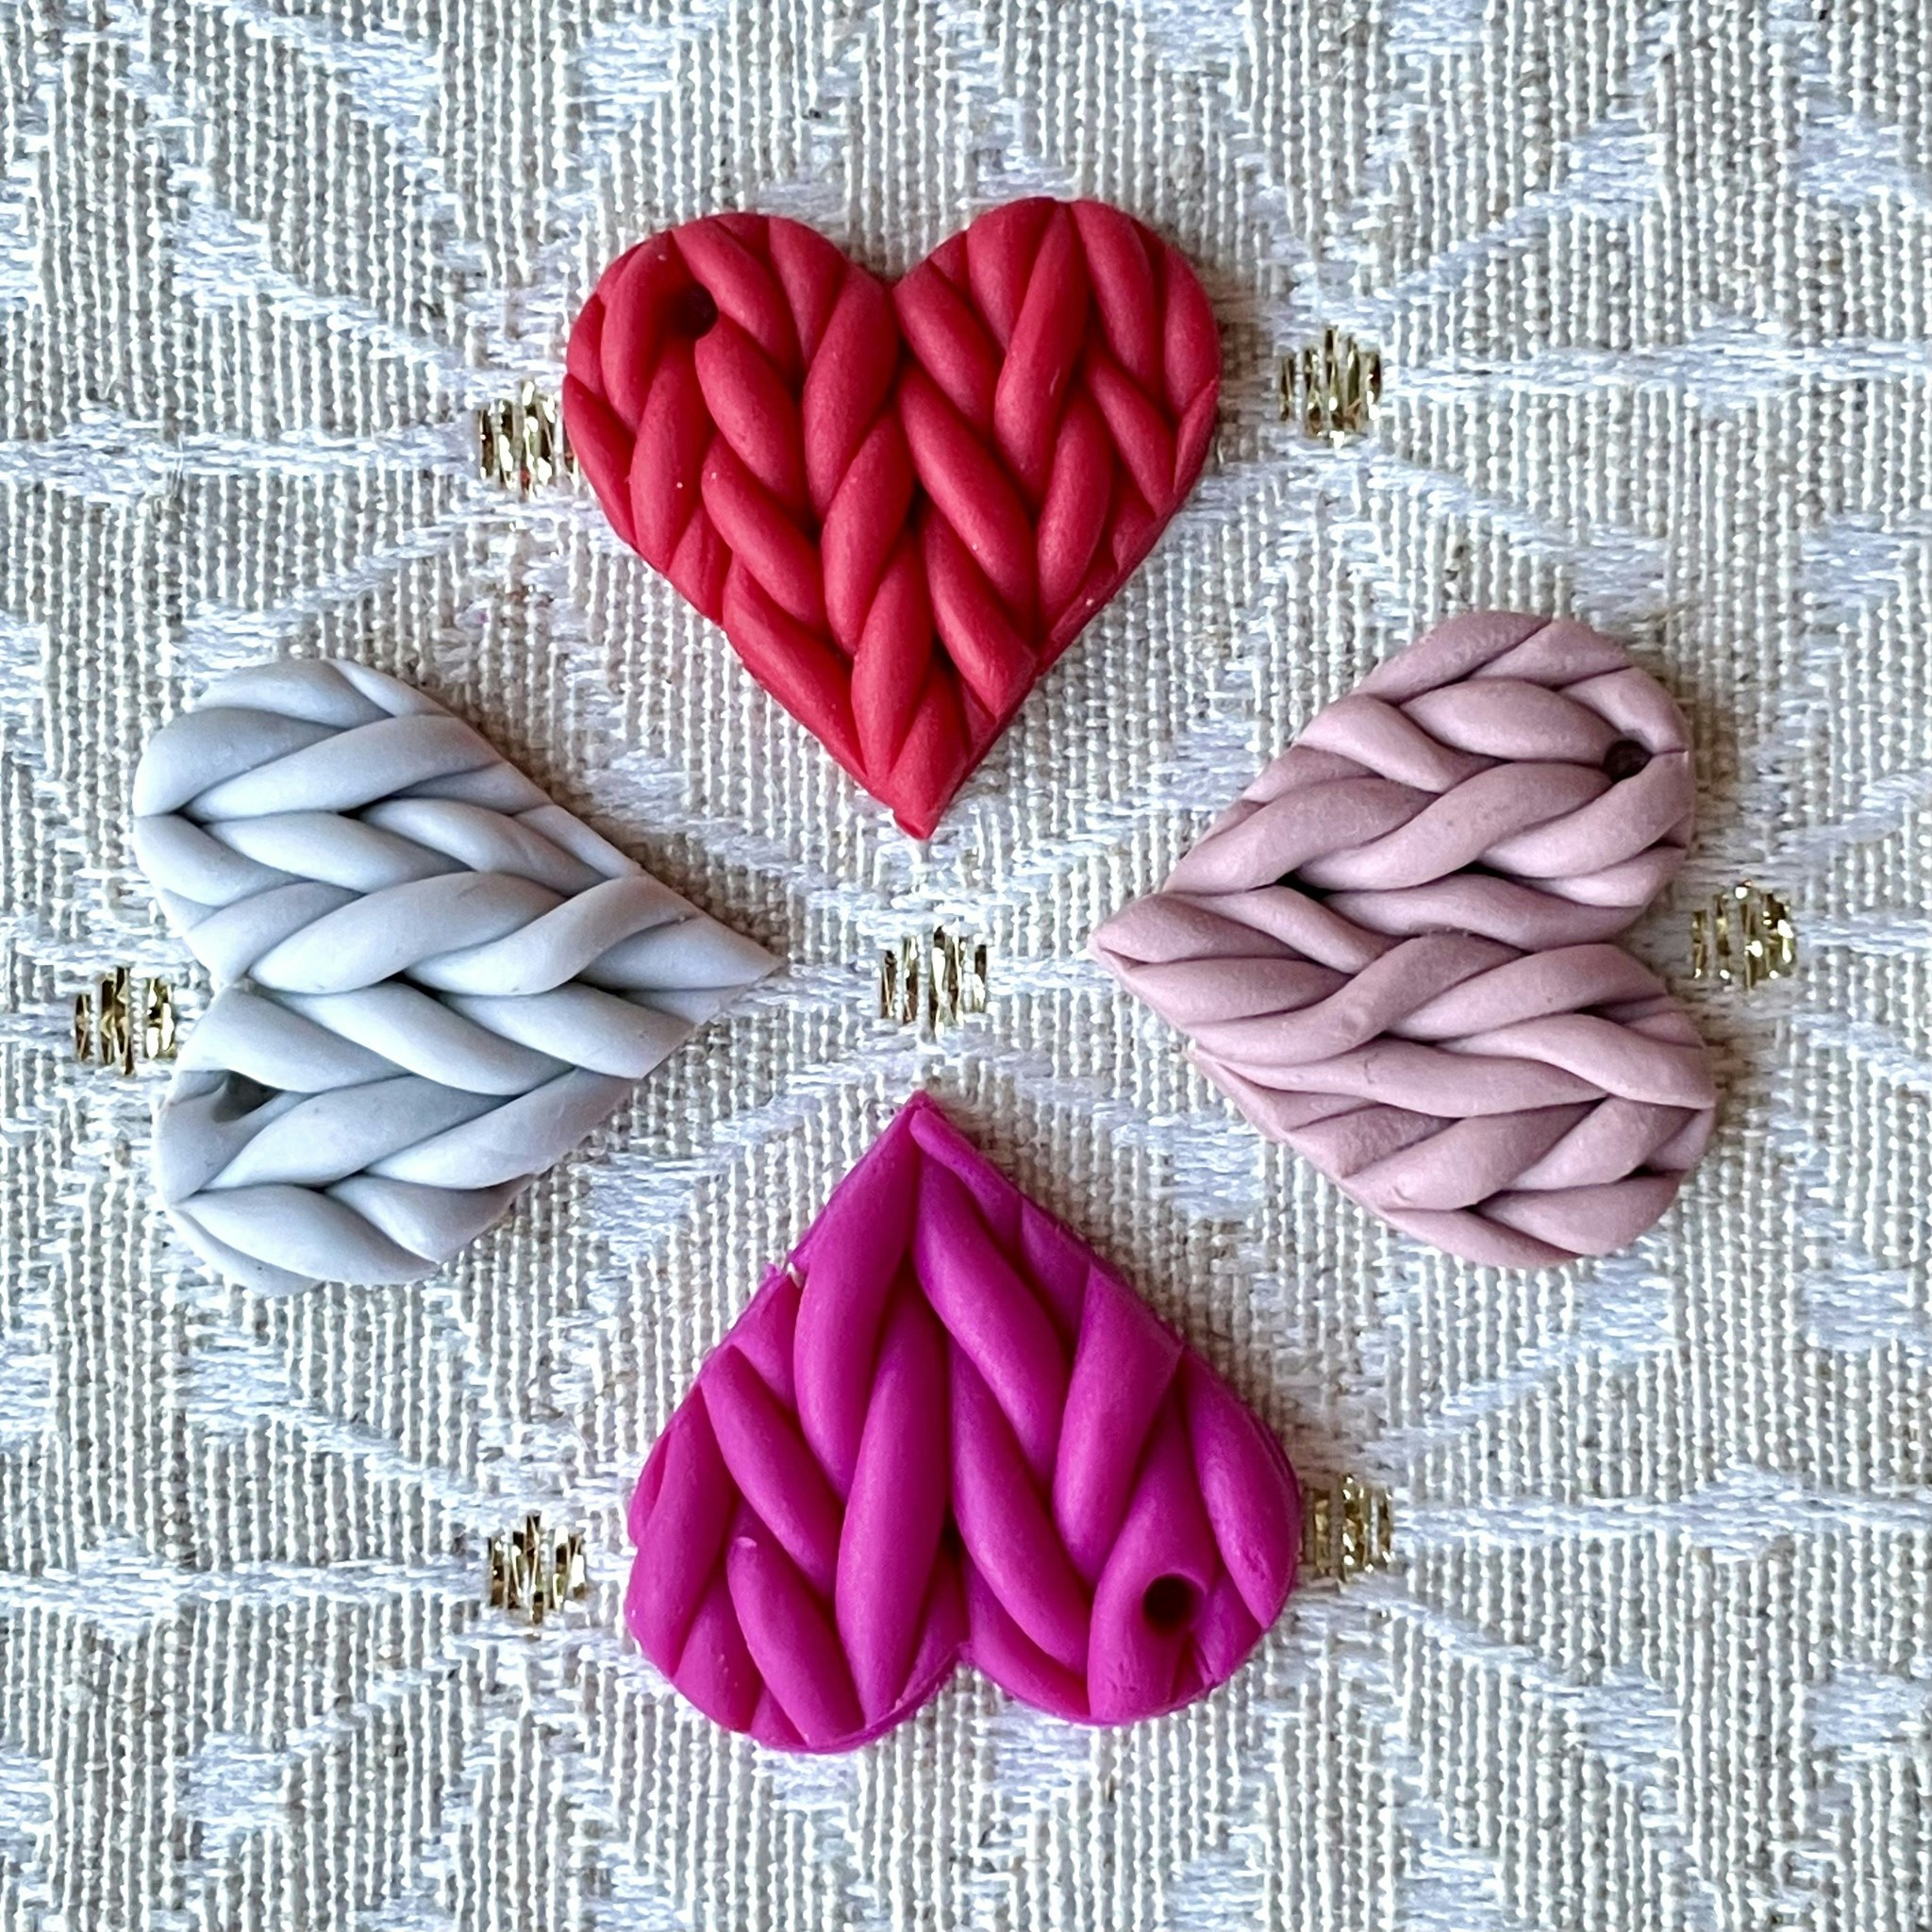 Knitted Hearts Different Colors Stud Earrings 1 pair